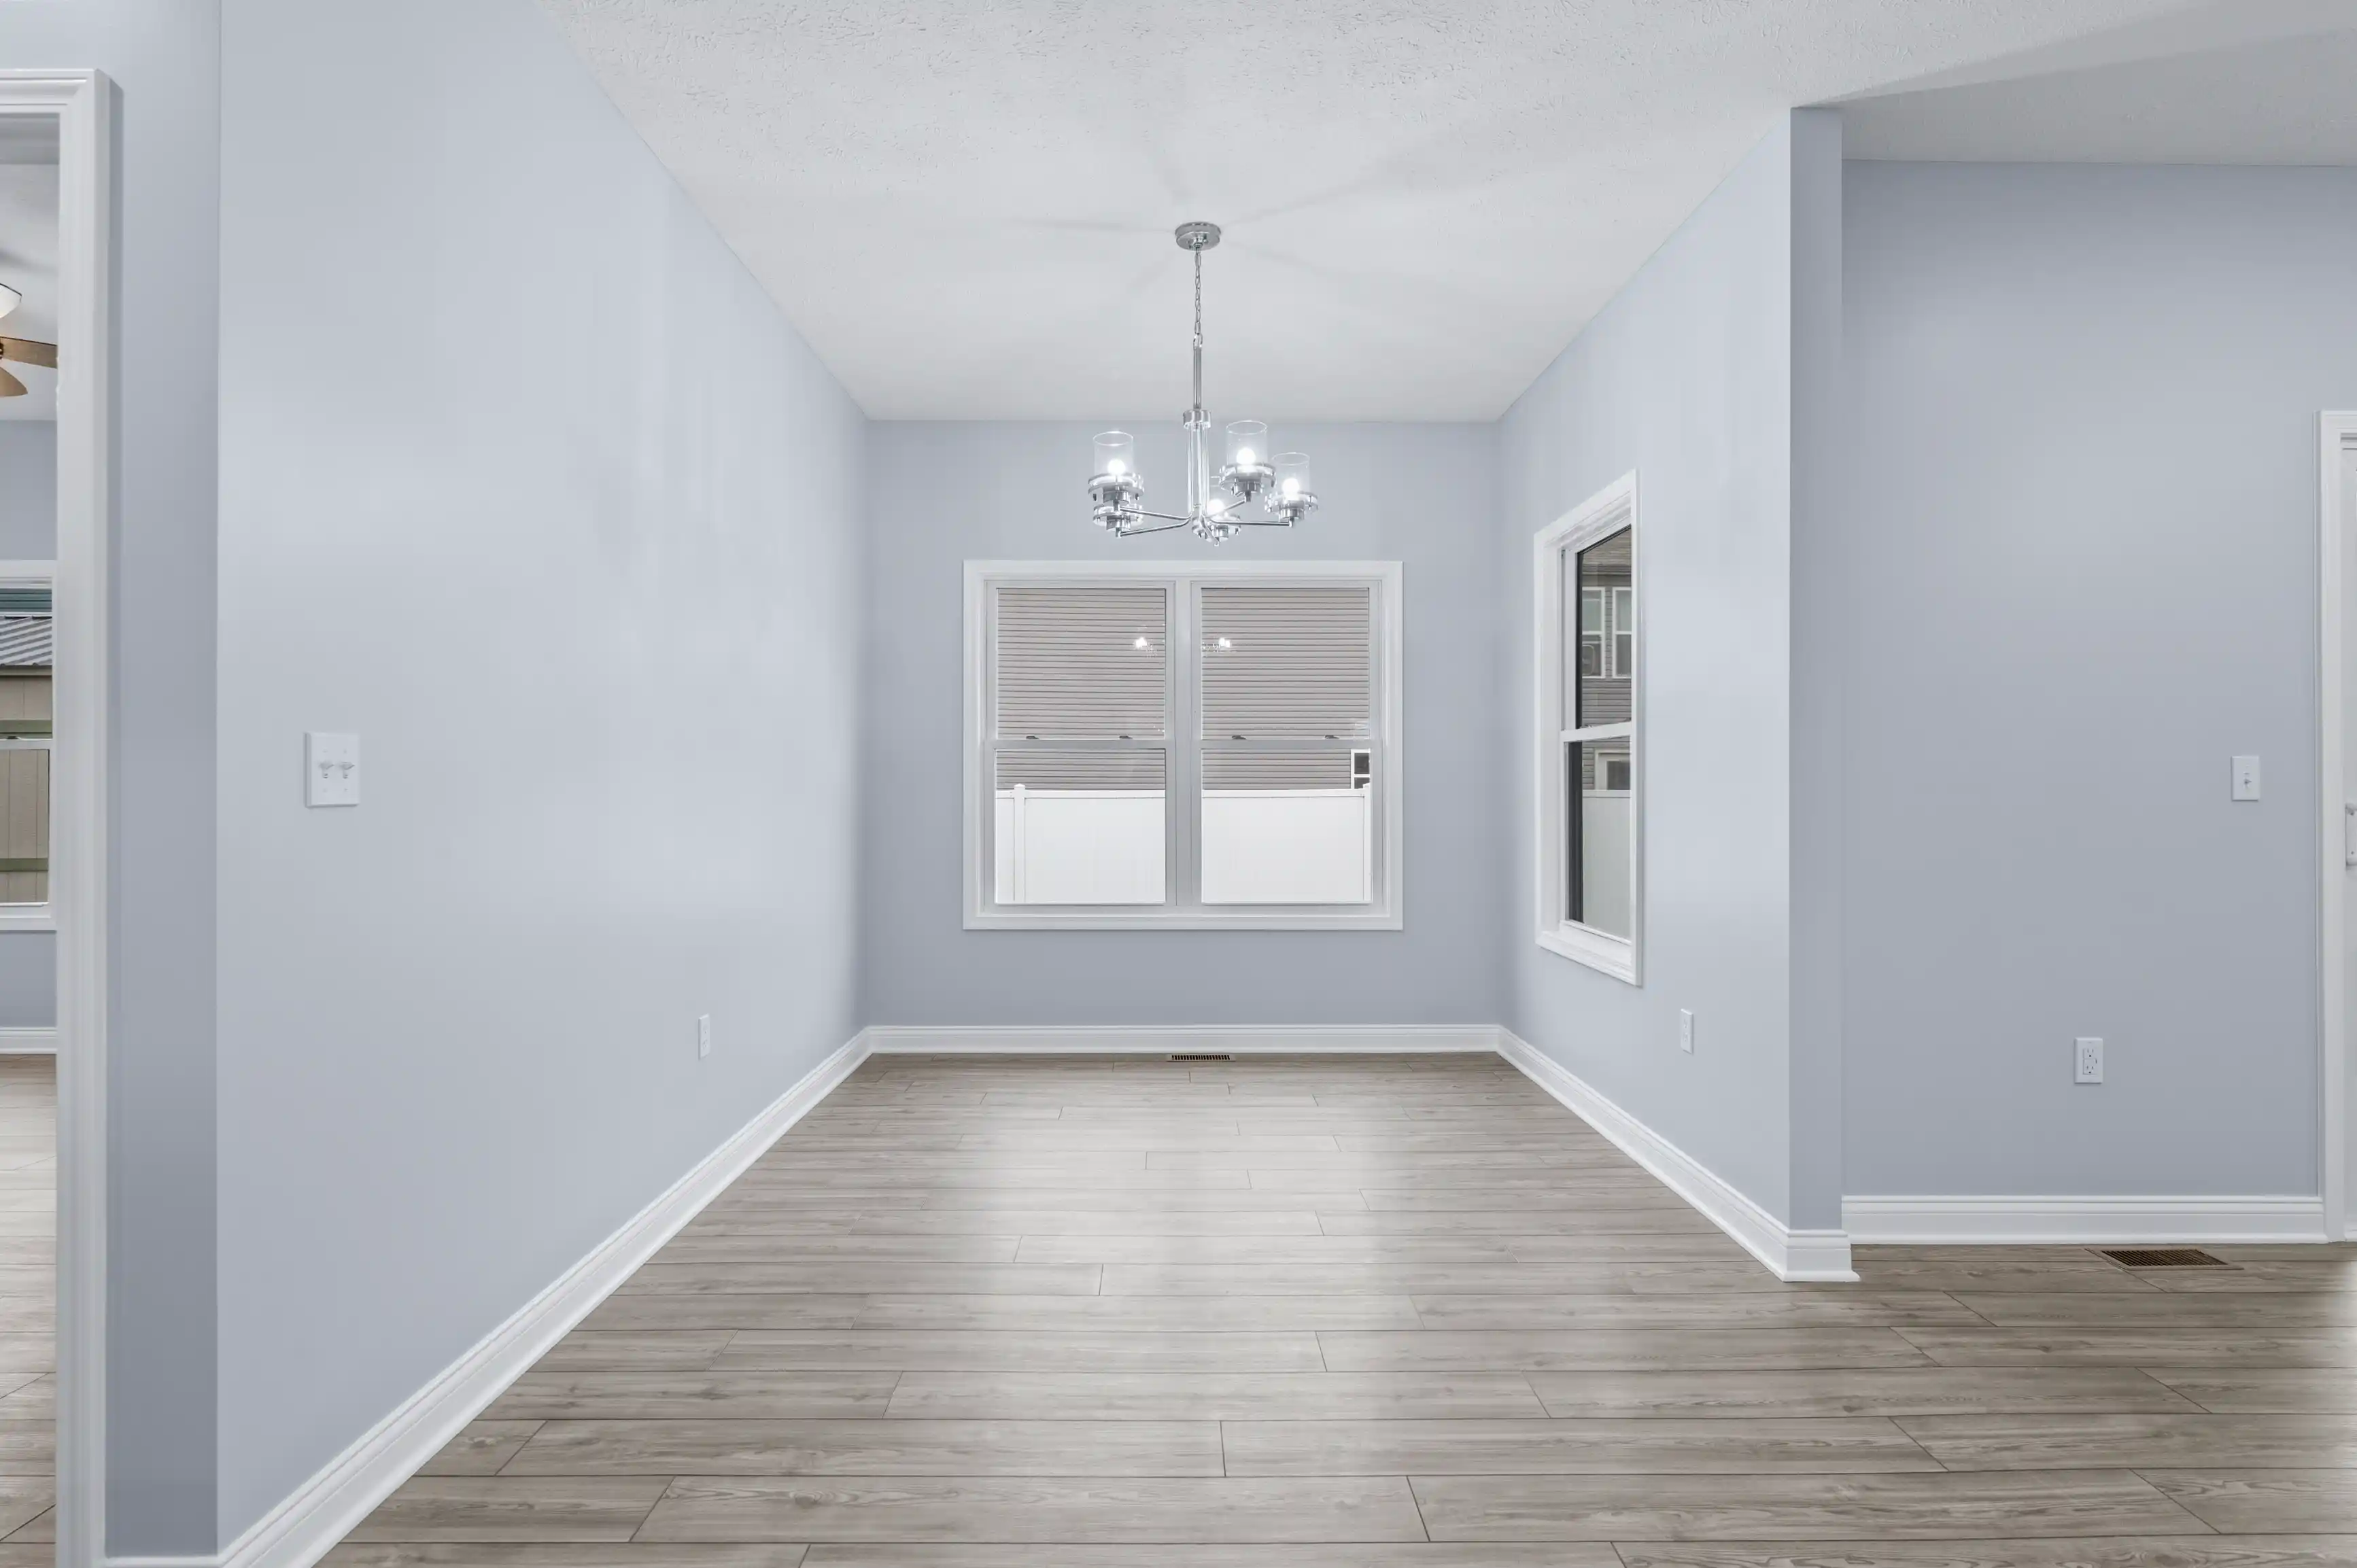 Empty room with light blue walls, a window with blinds, a silver chandelier, and laminate wood flooring.